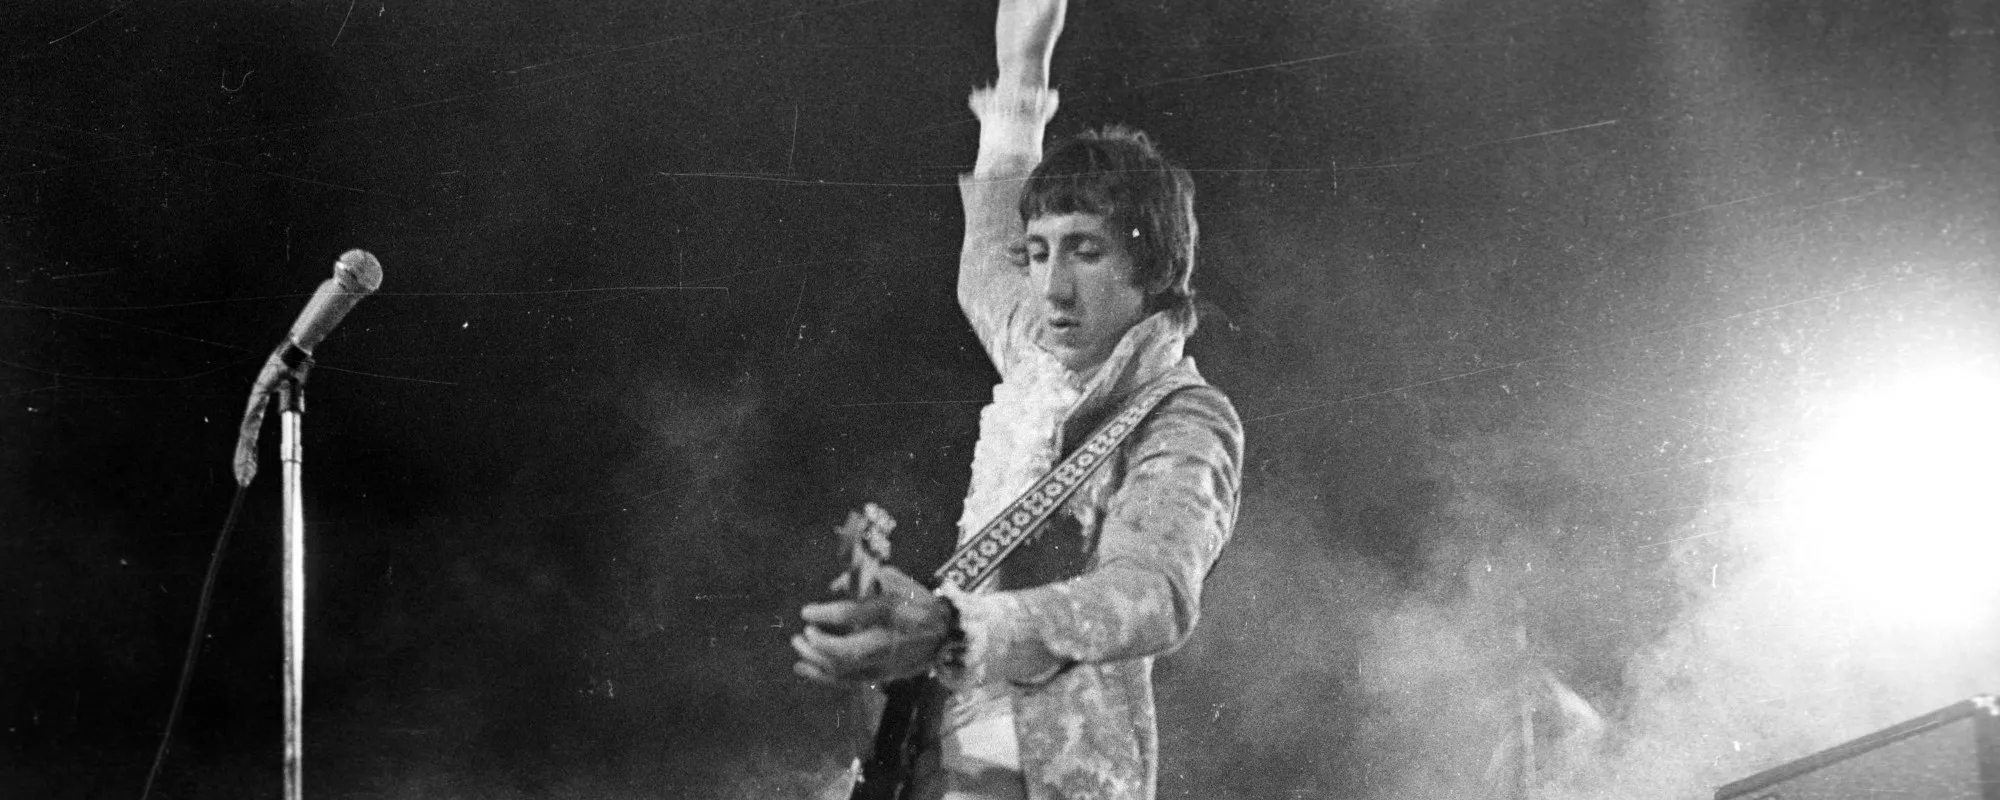 Lawsuits And Drugs: The Story Behind “Substitute” by The Who